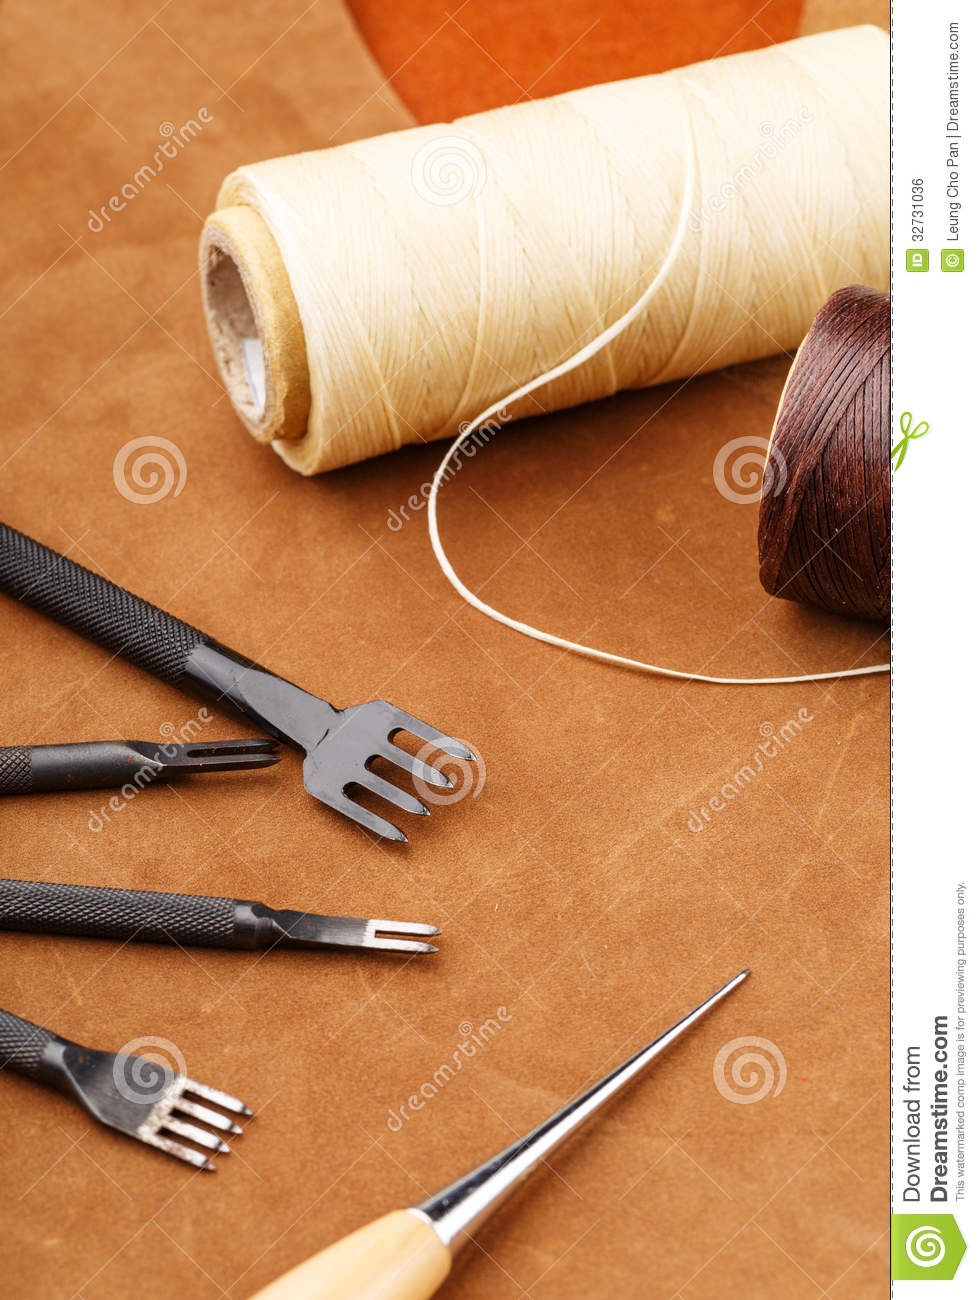 Leather Craft Tool Royalty Free Stock Image   Image  32731036